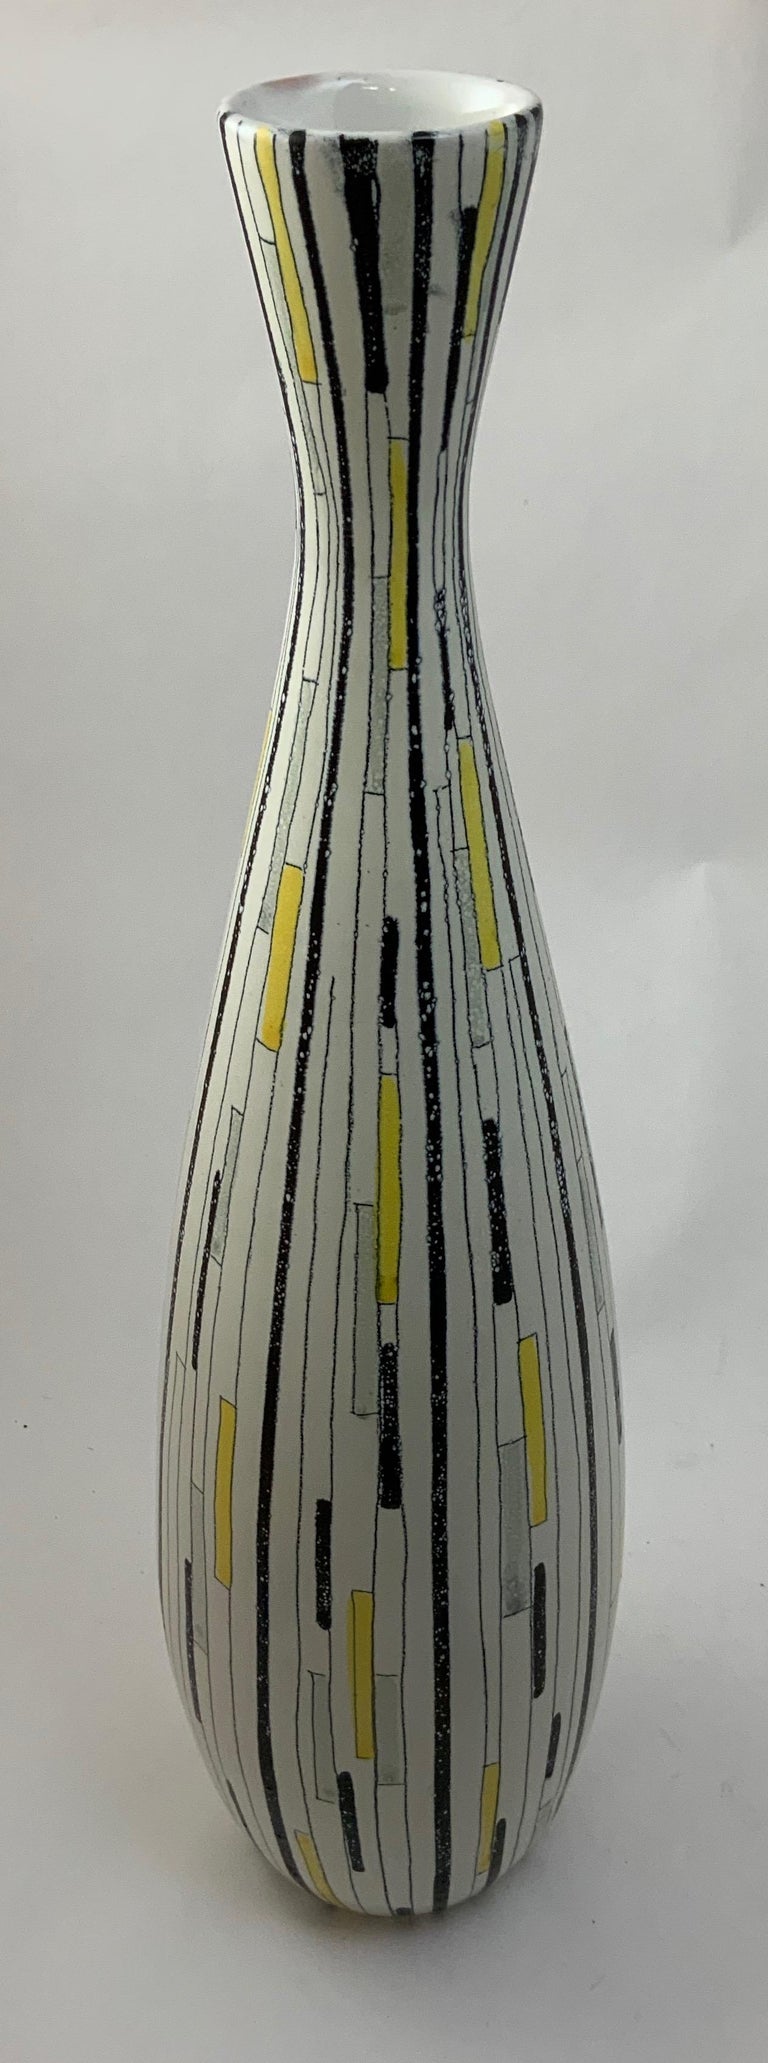 Tall and elegant geometric patchwork decorated vase in black, gray, white and yellow glazes. Fully signed on bottom, B 105, Italy (Italy). Aldo Londi for Bitossi, circa 1950-1960. Good condition. No visible chips, cracks, crazing or